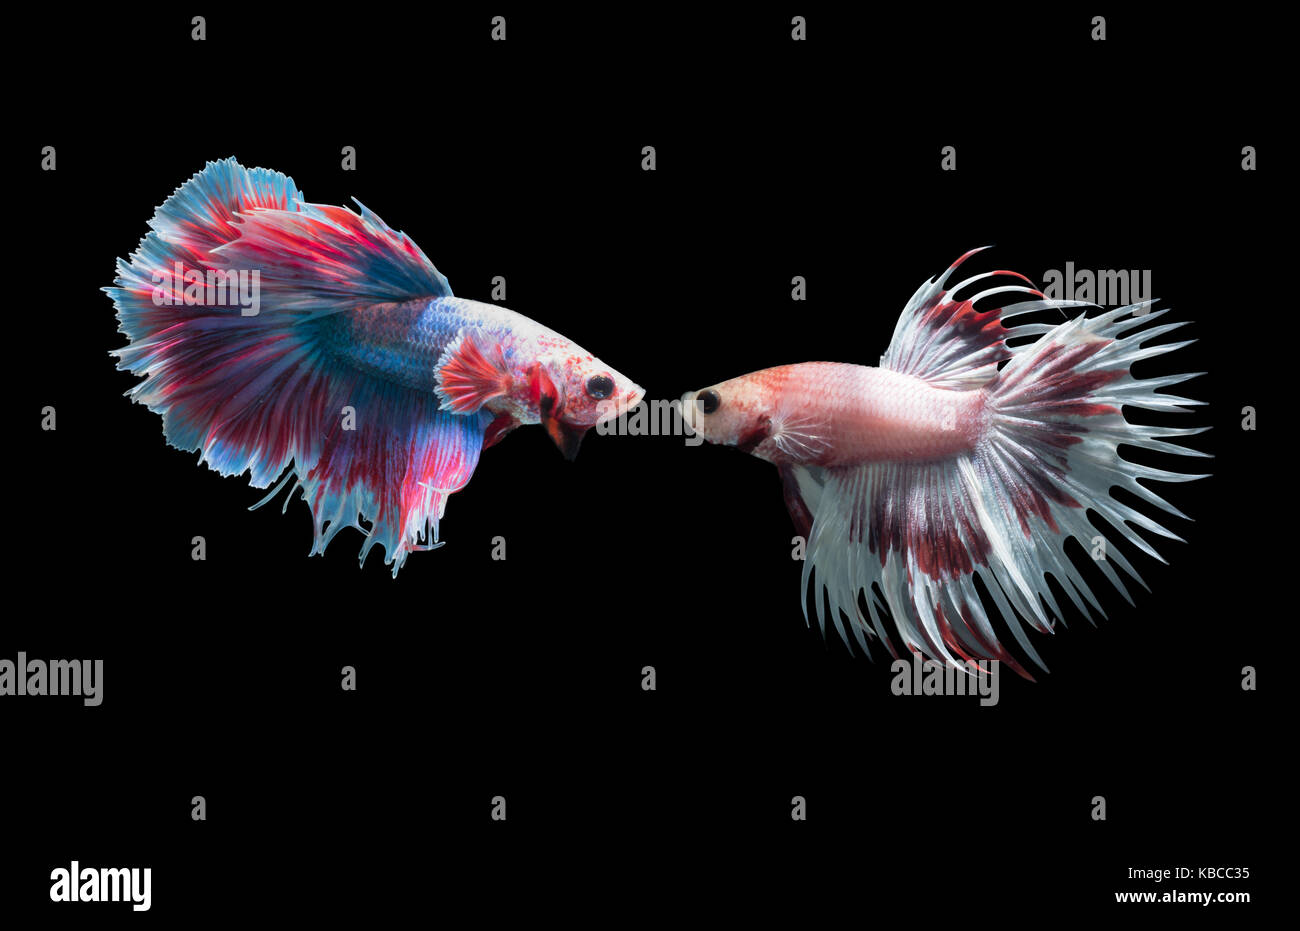 Macro of 2 Siamese fighting fish (crown tails fighting fishs), betta splendens isolated on black background, animal concept. Stock Photo